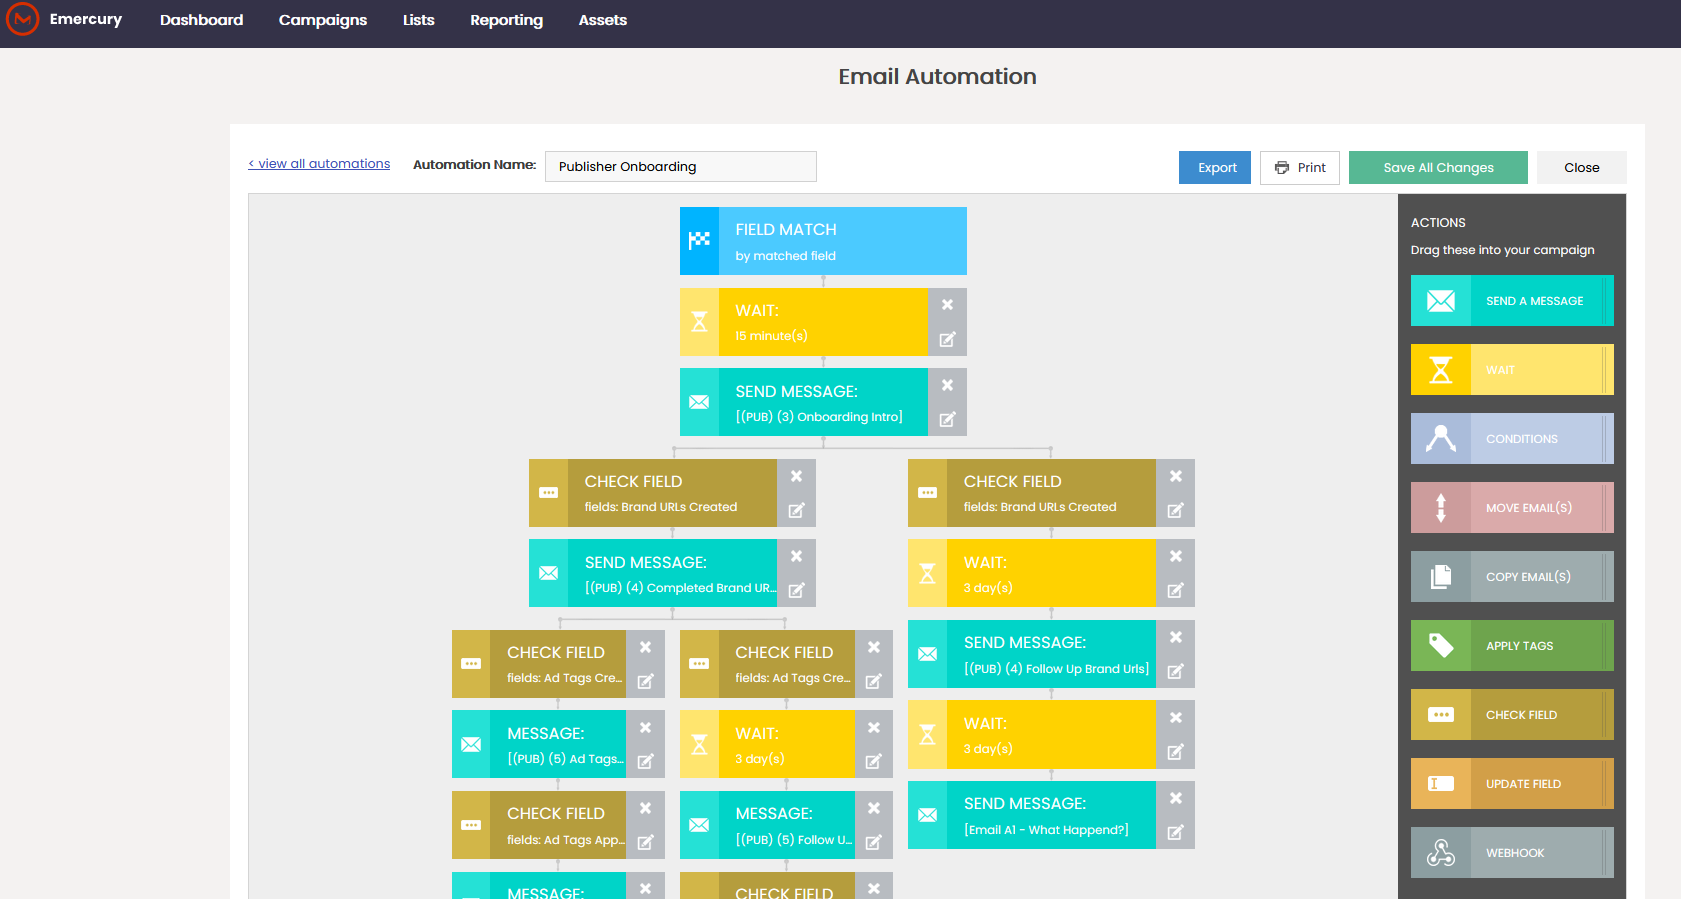 Email Automation Campaigns